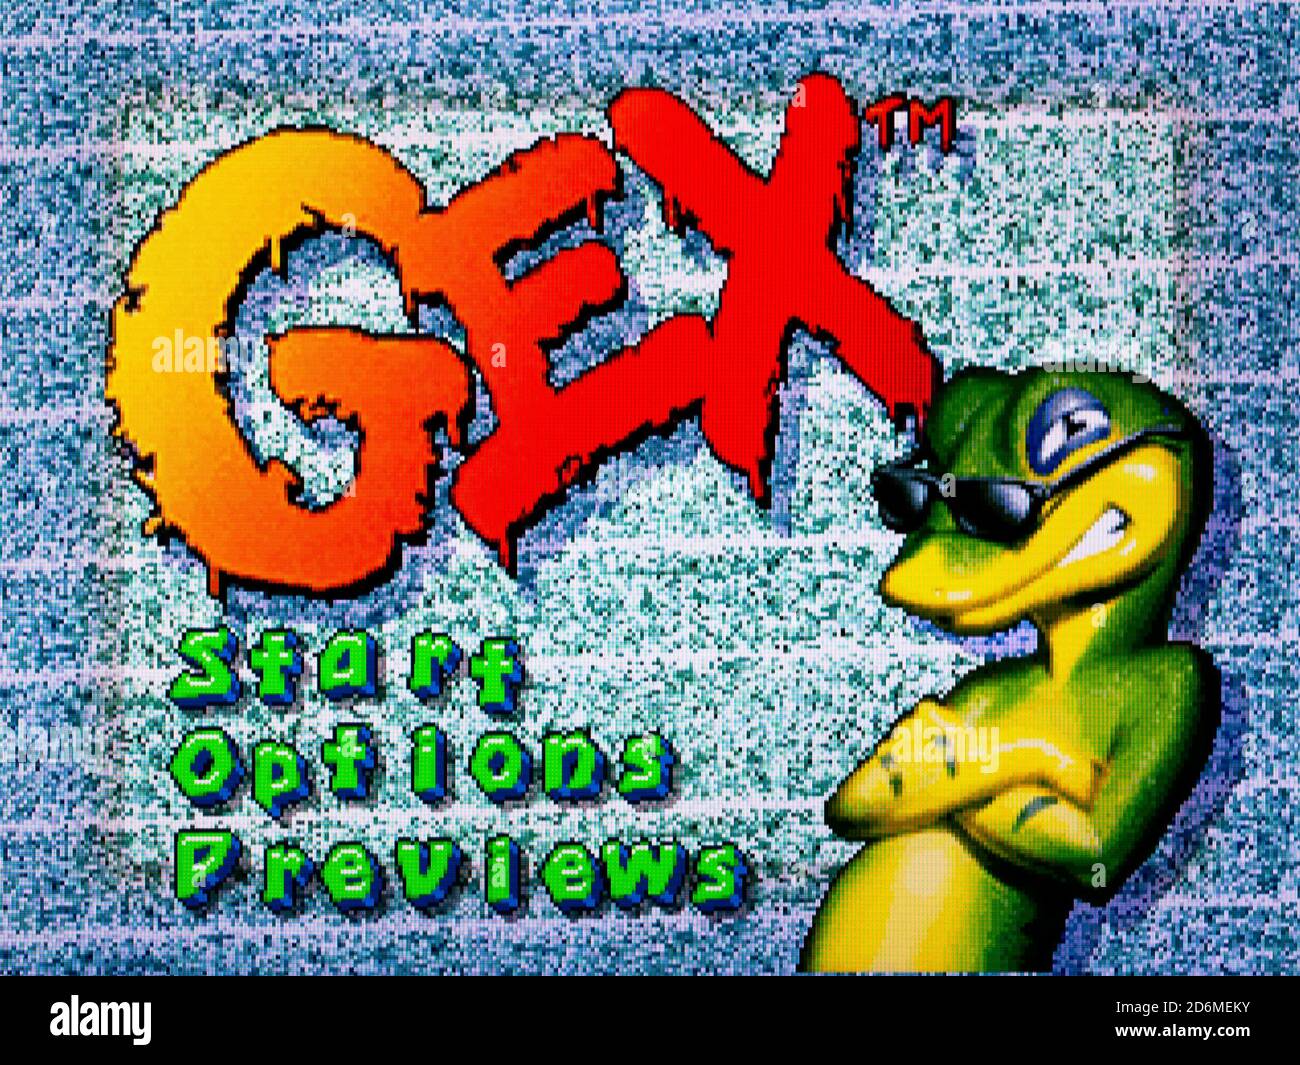 Gex - 3DO Interactive Multiplayer Videogame - Editorial Use Only Stock Photo